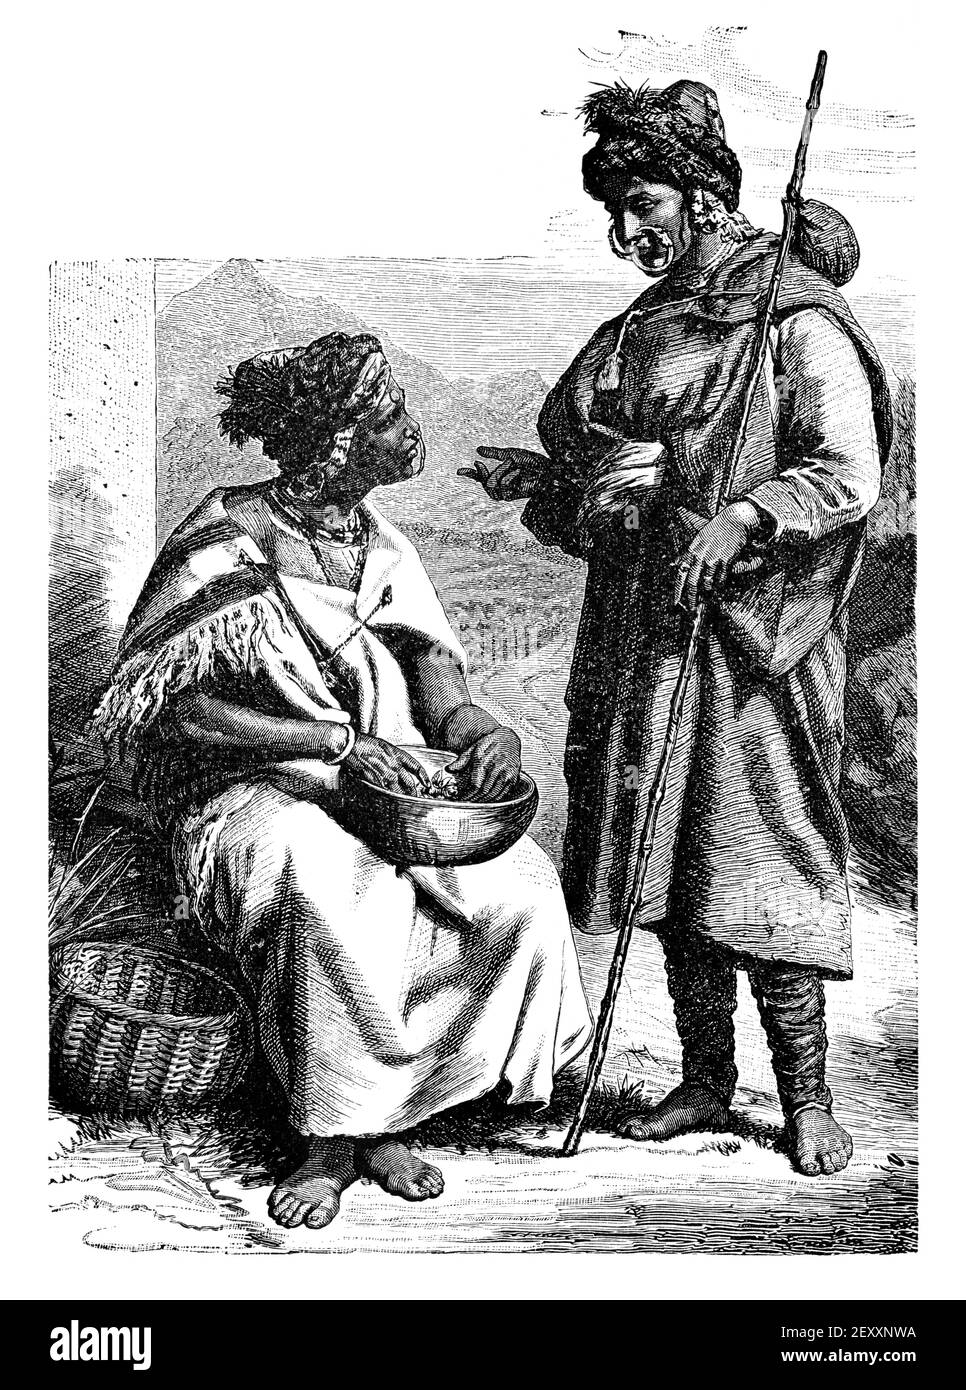 Women from Kullu town, India.Culture and history of Asia. Vintage antique black and white illustration. 19th century. Stock Photo